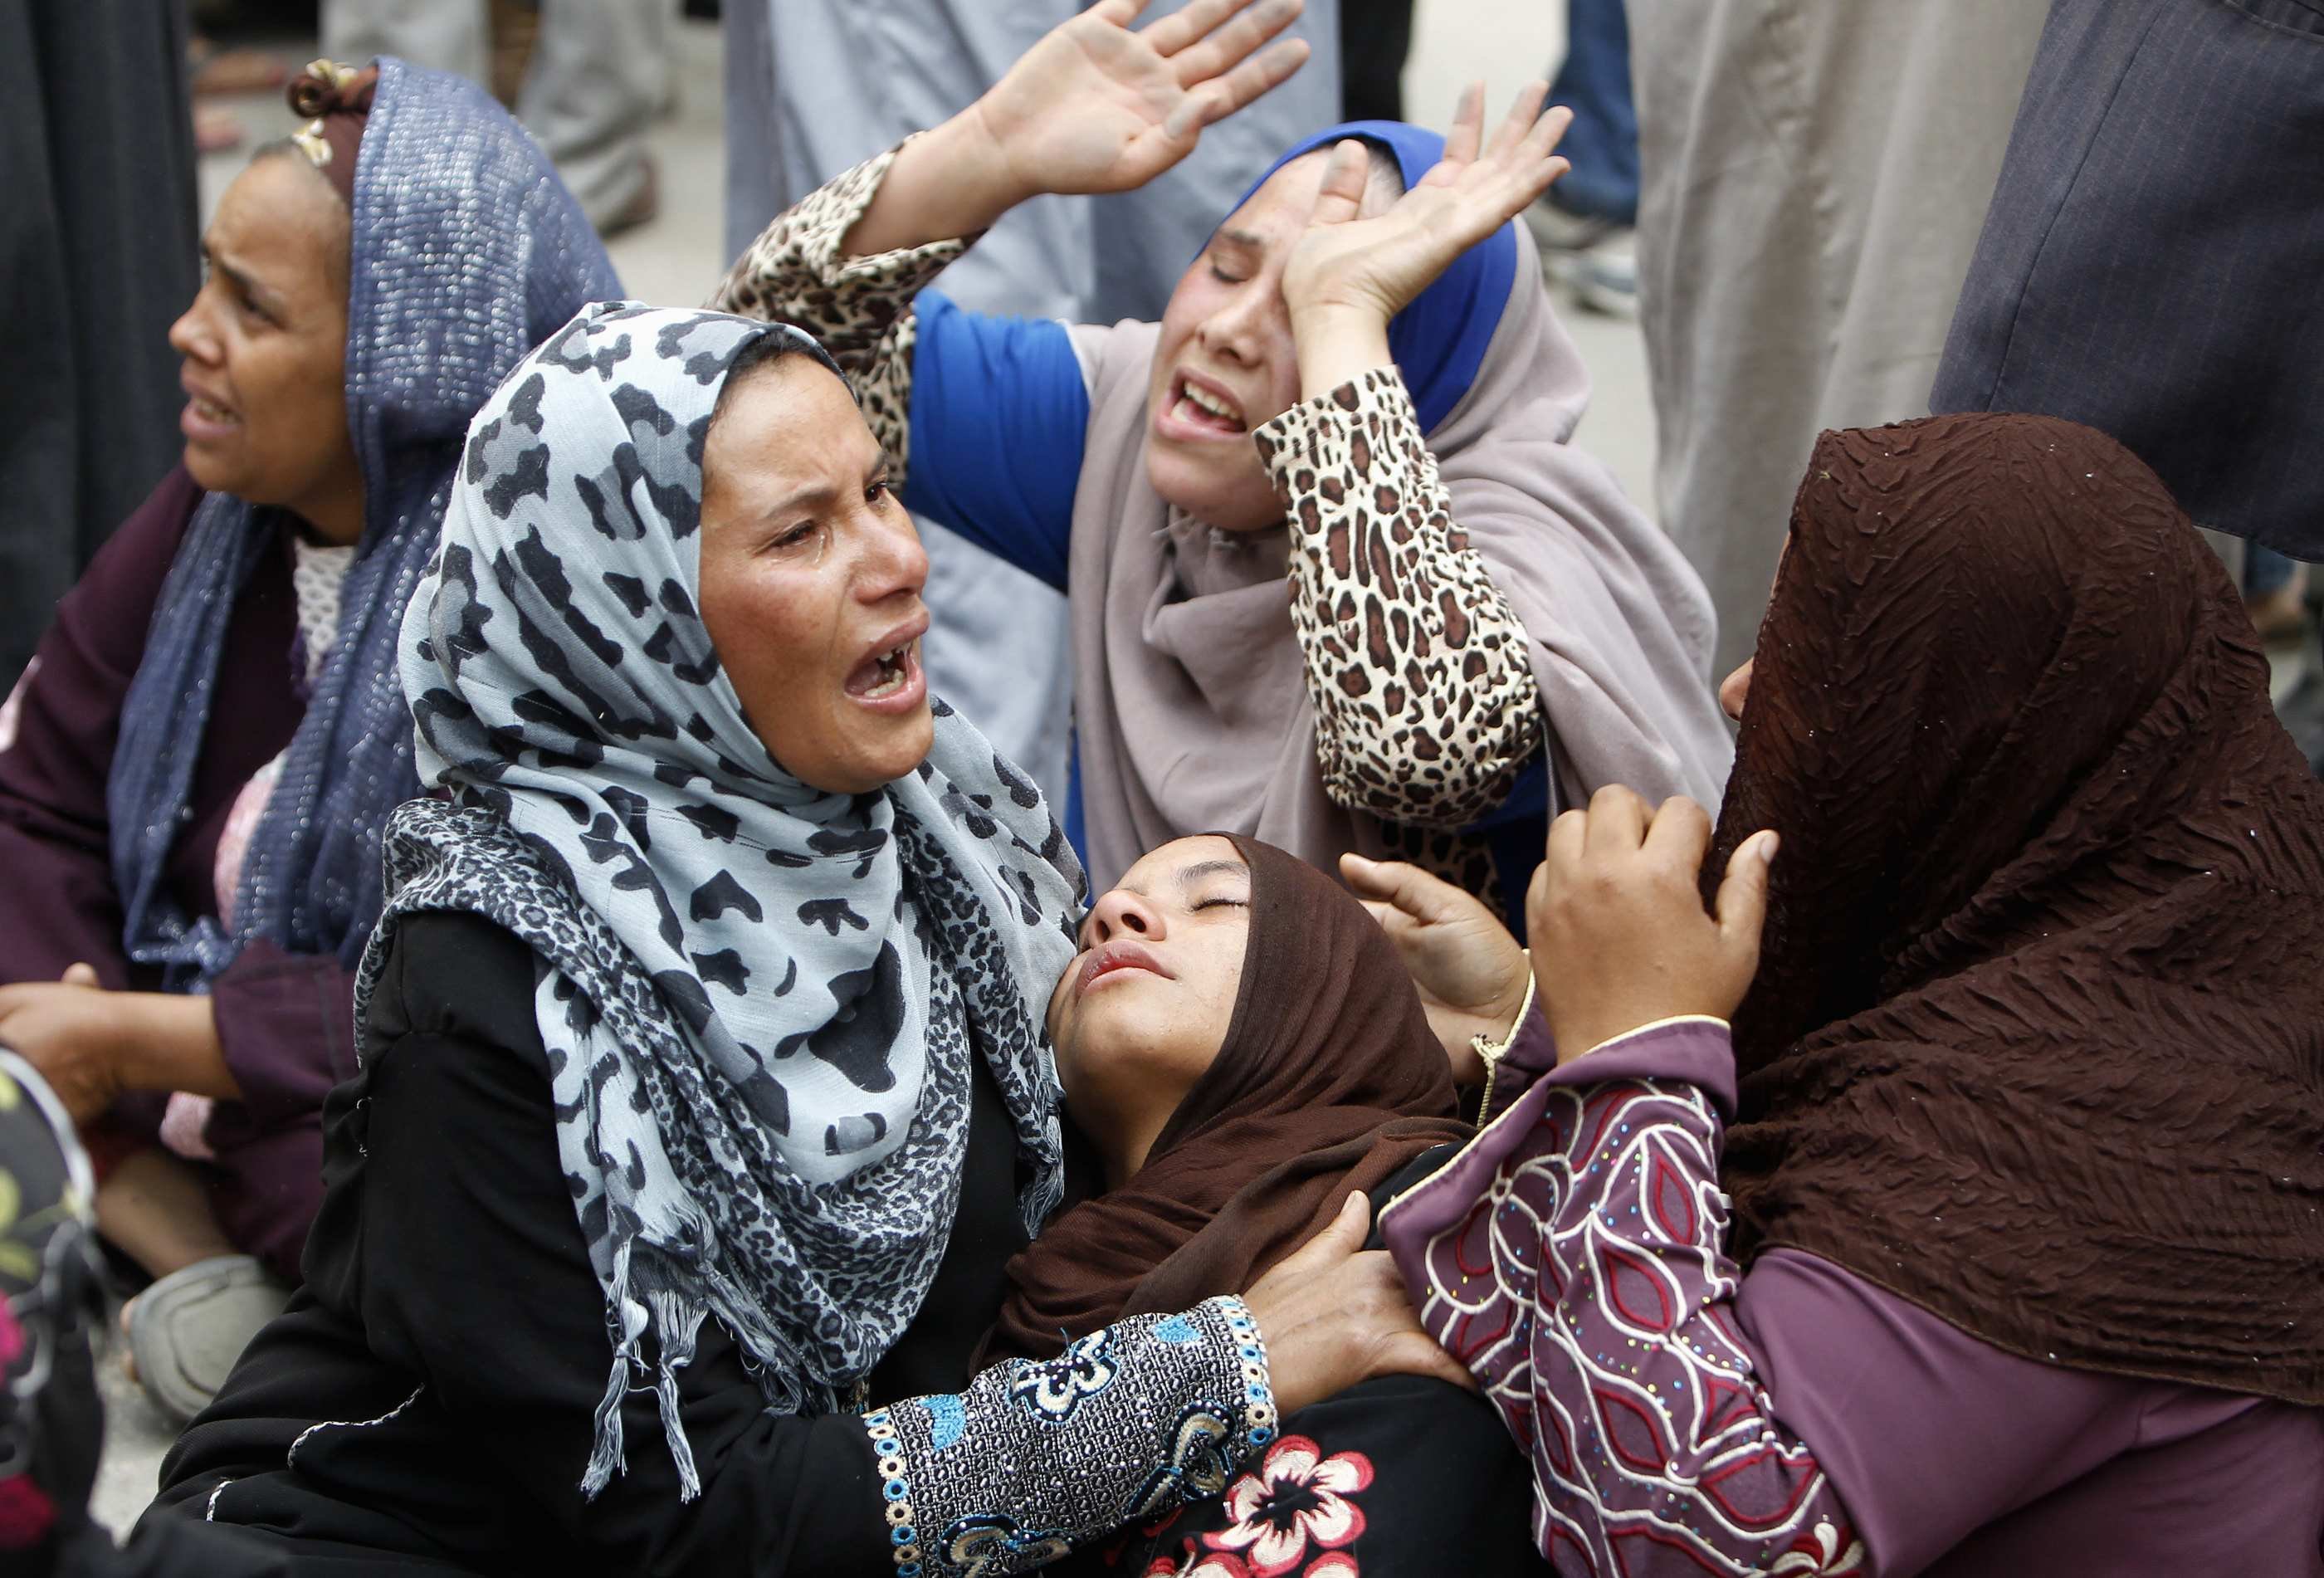 Relatives and families of members of the Muslim Brotherhood and supporters of ousted President Mohamed Morsi react after hearing the sentence, in front of the court in Minya, south of Cairo, Apr. 28, 2014. (Mohamed Abd El Ghany—Reuters)